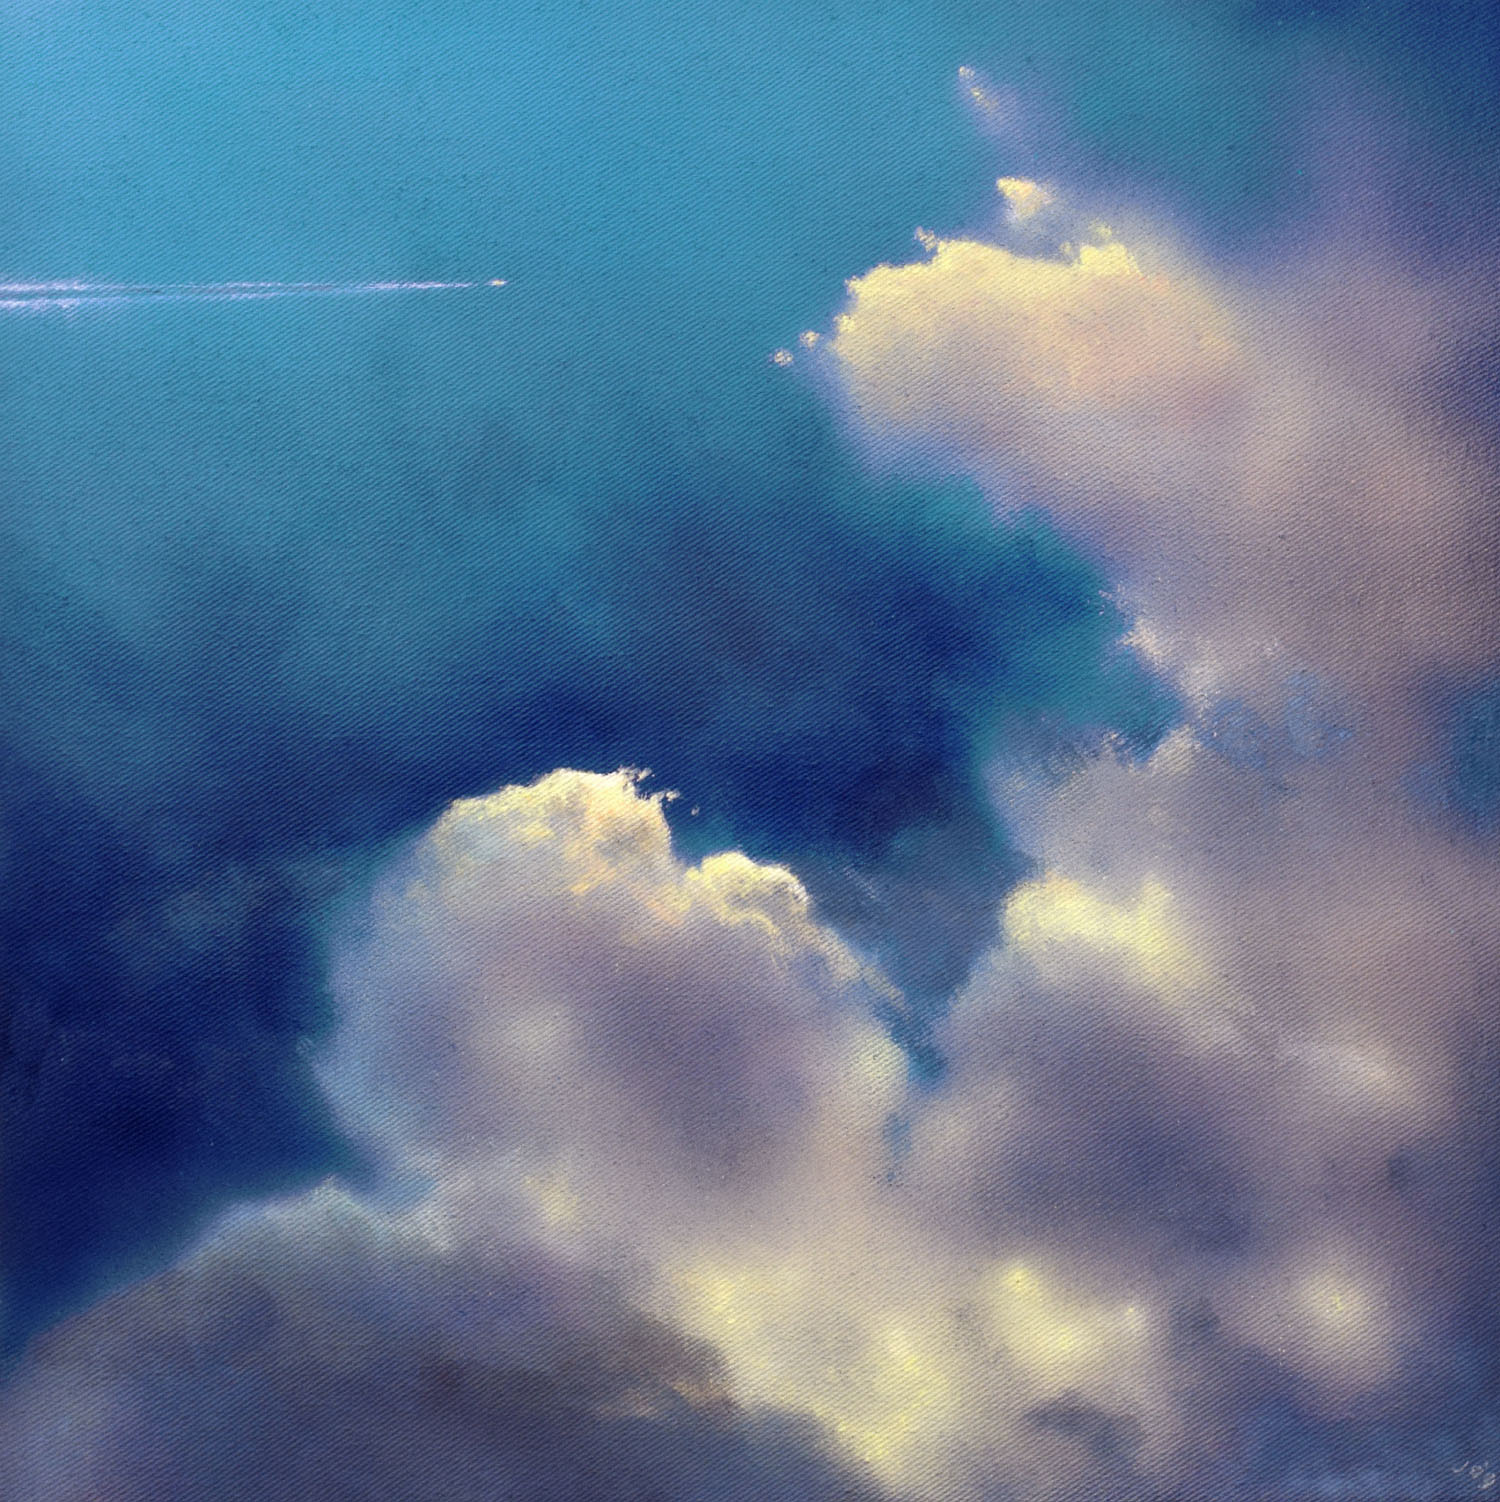 Icarus I by John O'Grady | A striking skyscape with large cumulus clouds in a blue sky